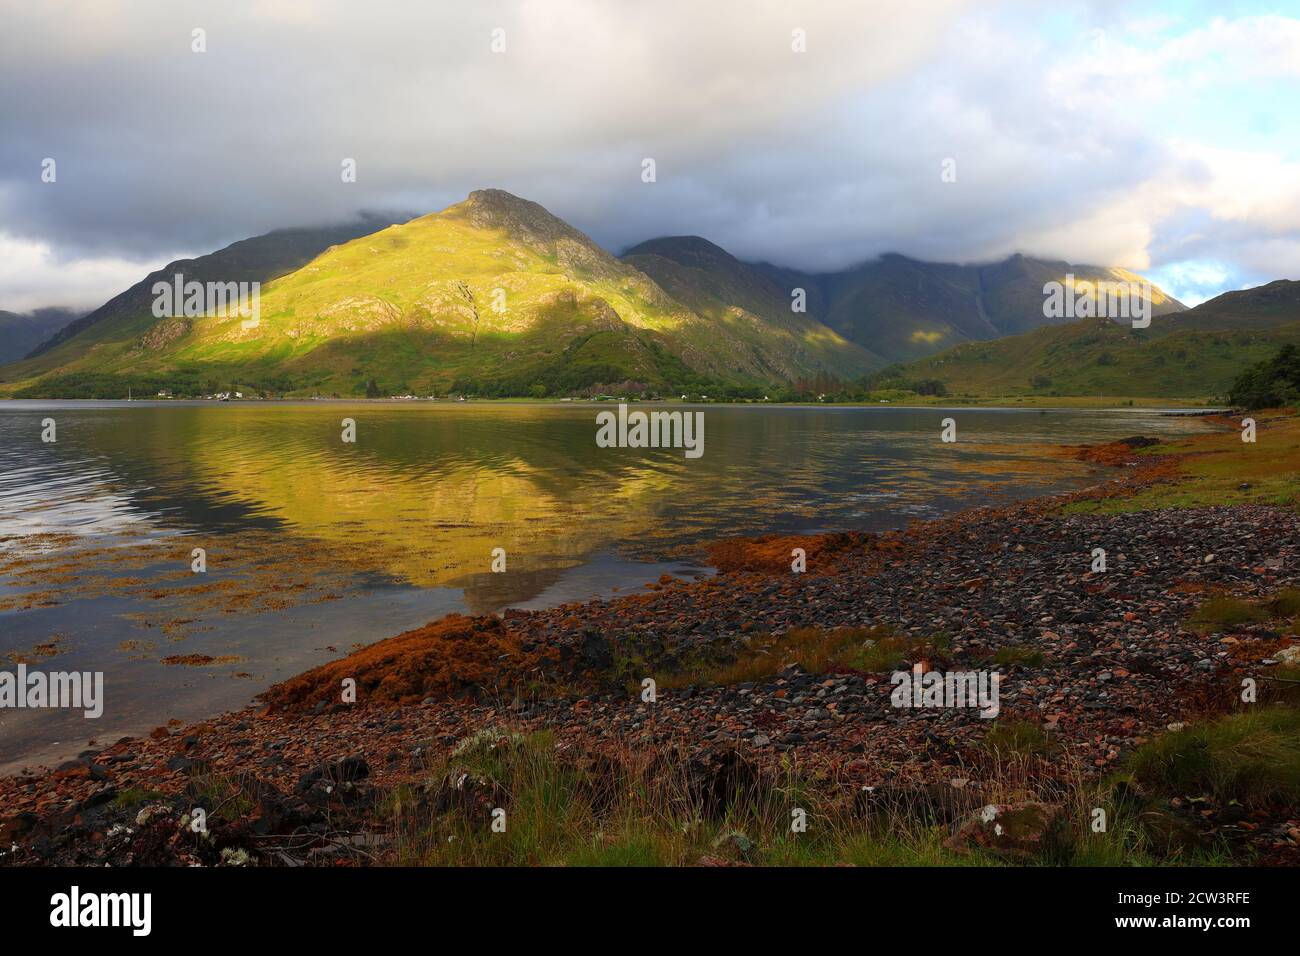 Landscape image of the Five Sisters of Kintail Mountain range from the shores of Loch Duich, Glen Shiel, West Highlands, Scotland, UK. Stock Photo